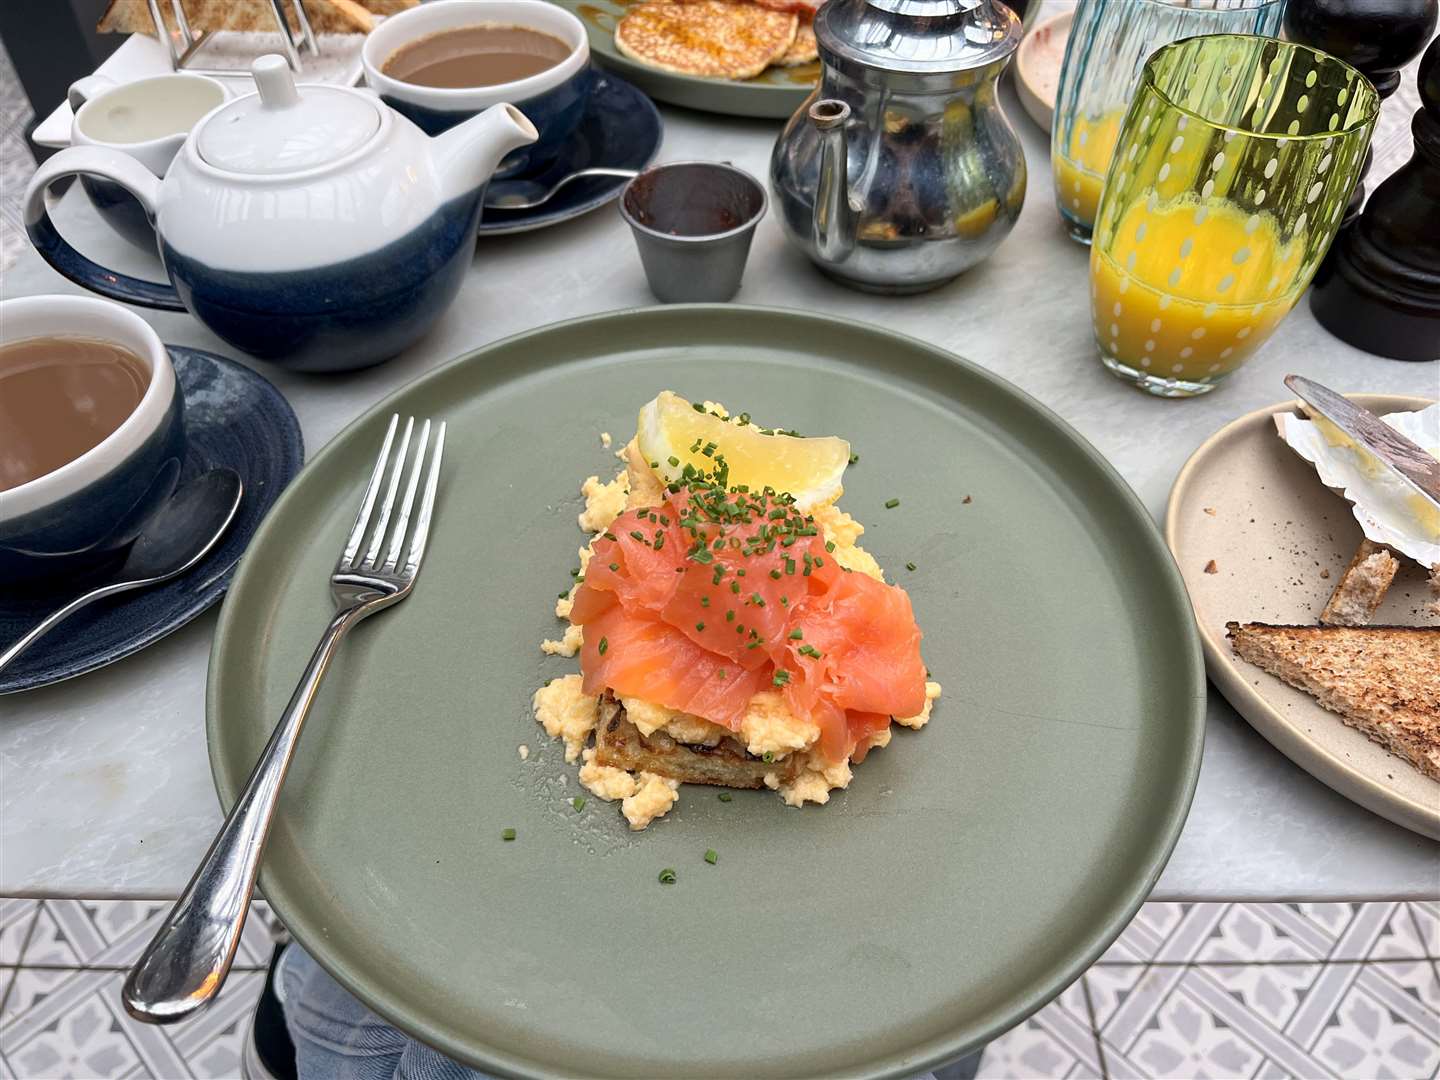 For breakfast, Chantal opted for scrambled eggs and Scottish smoked salmon